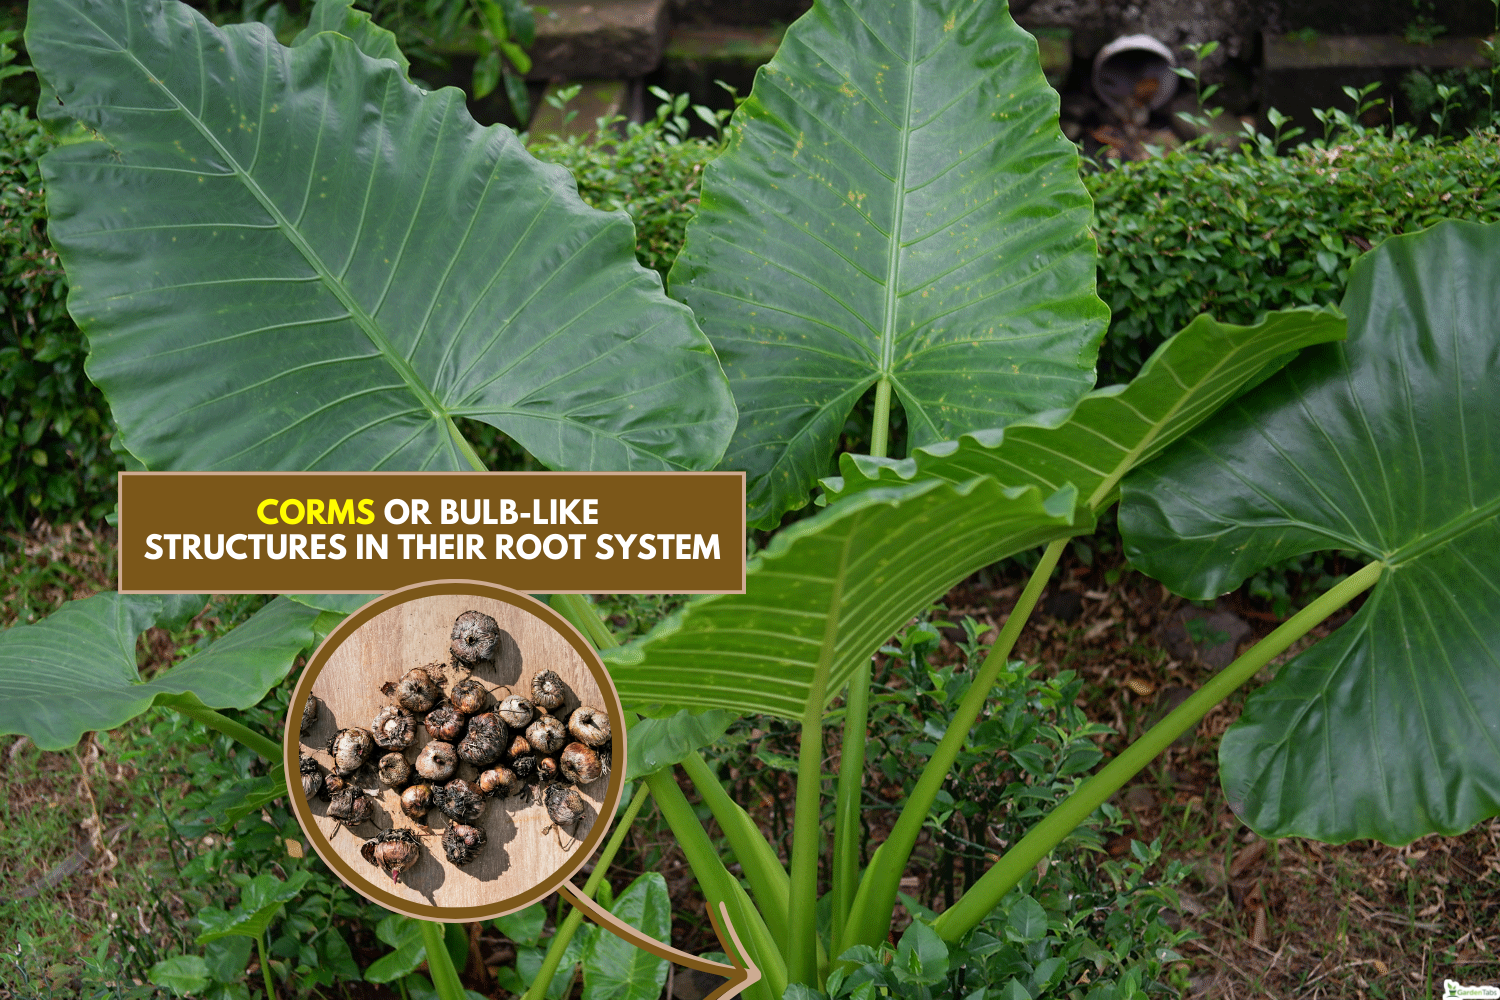 The big leaves of Alocasia odora also called night-scented lily, Asian taro or giant upright elephant ear, Do All Alocasias Have Corms [And How To Find Them]